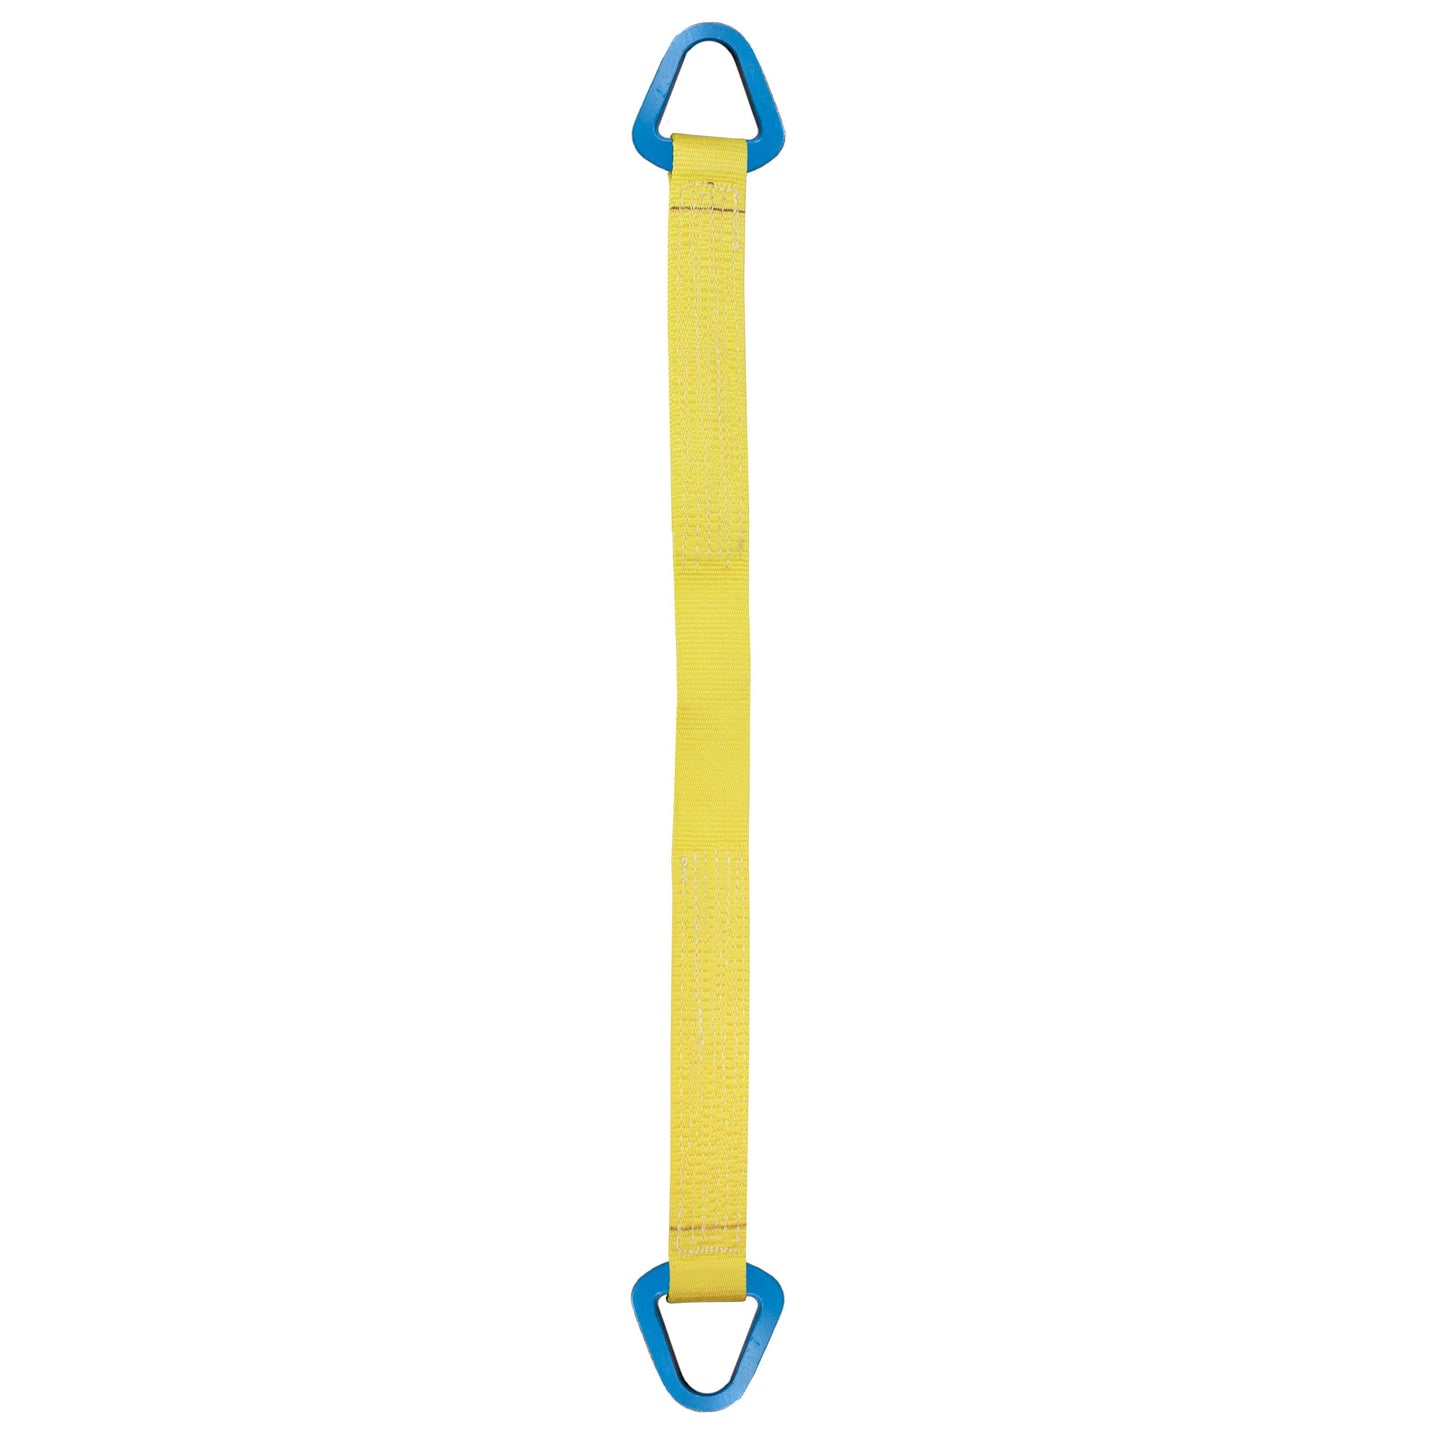 Nylon Lifting Sling Triangle 4 inch x 10 foot 1ply image 1 of 2